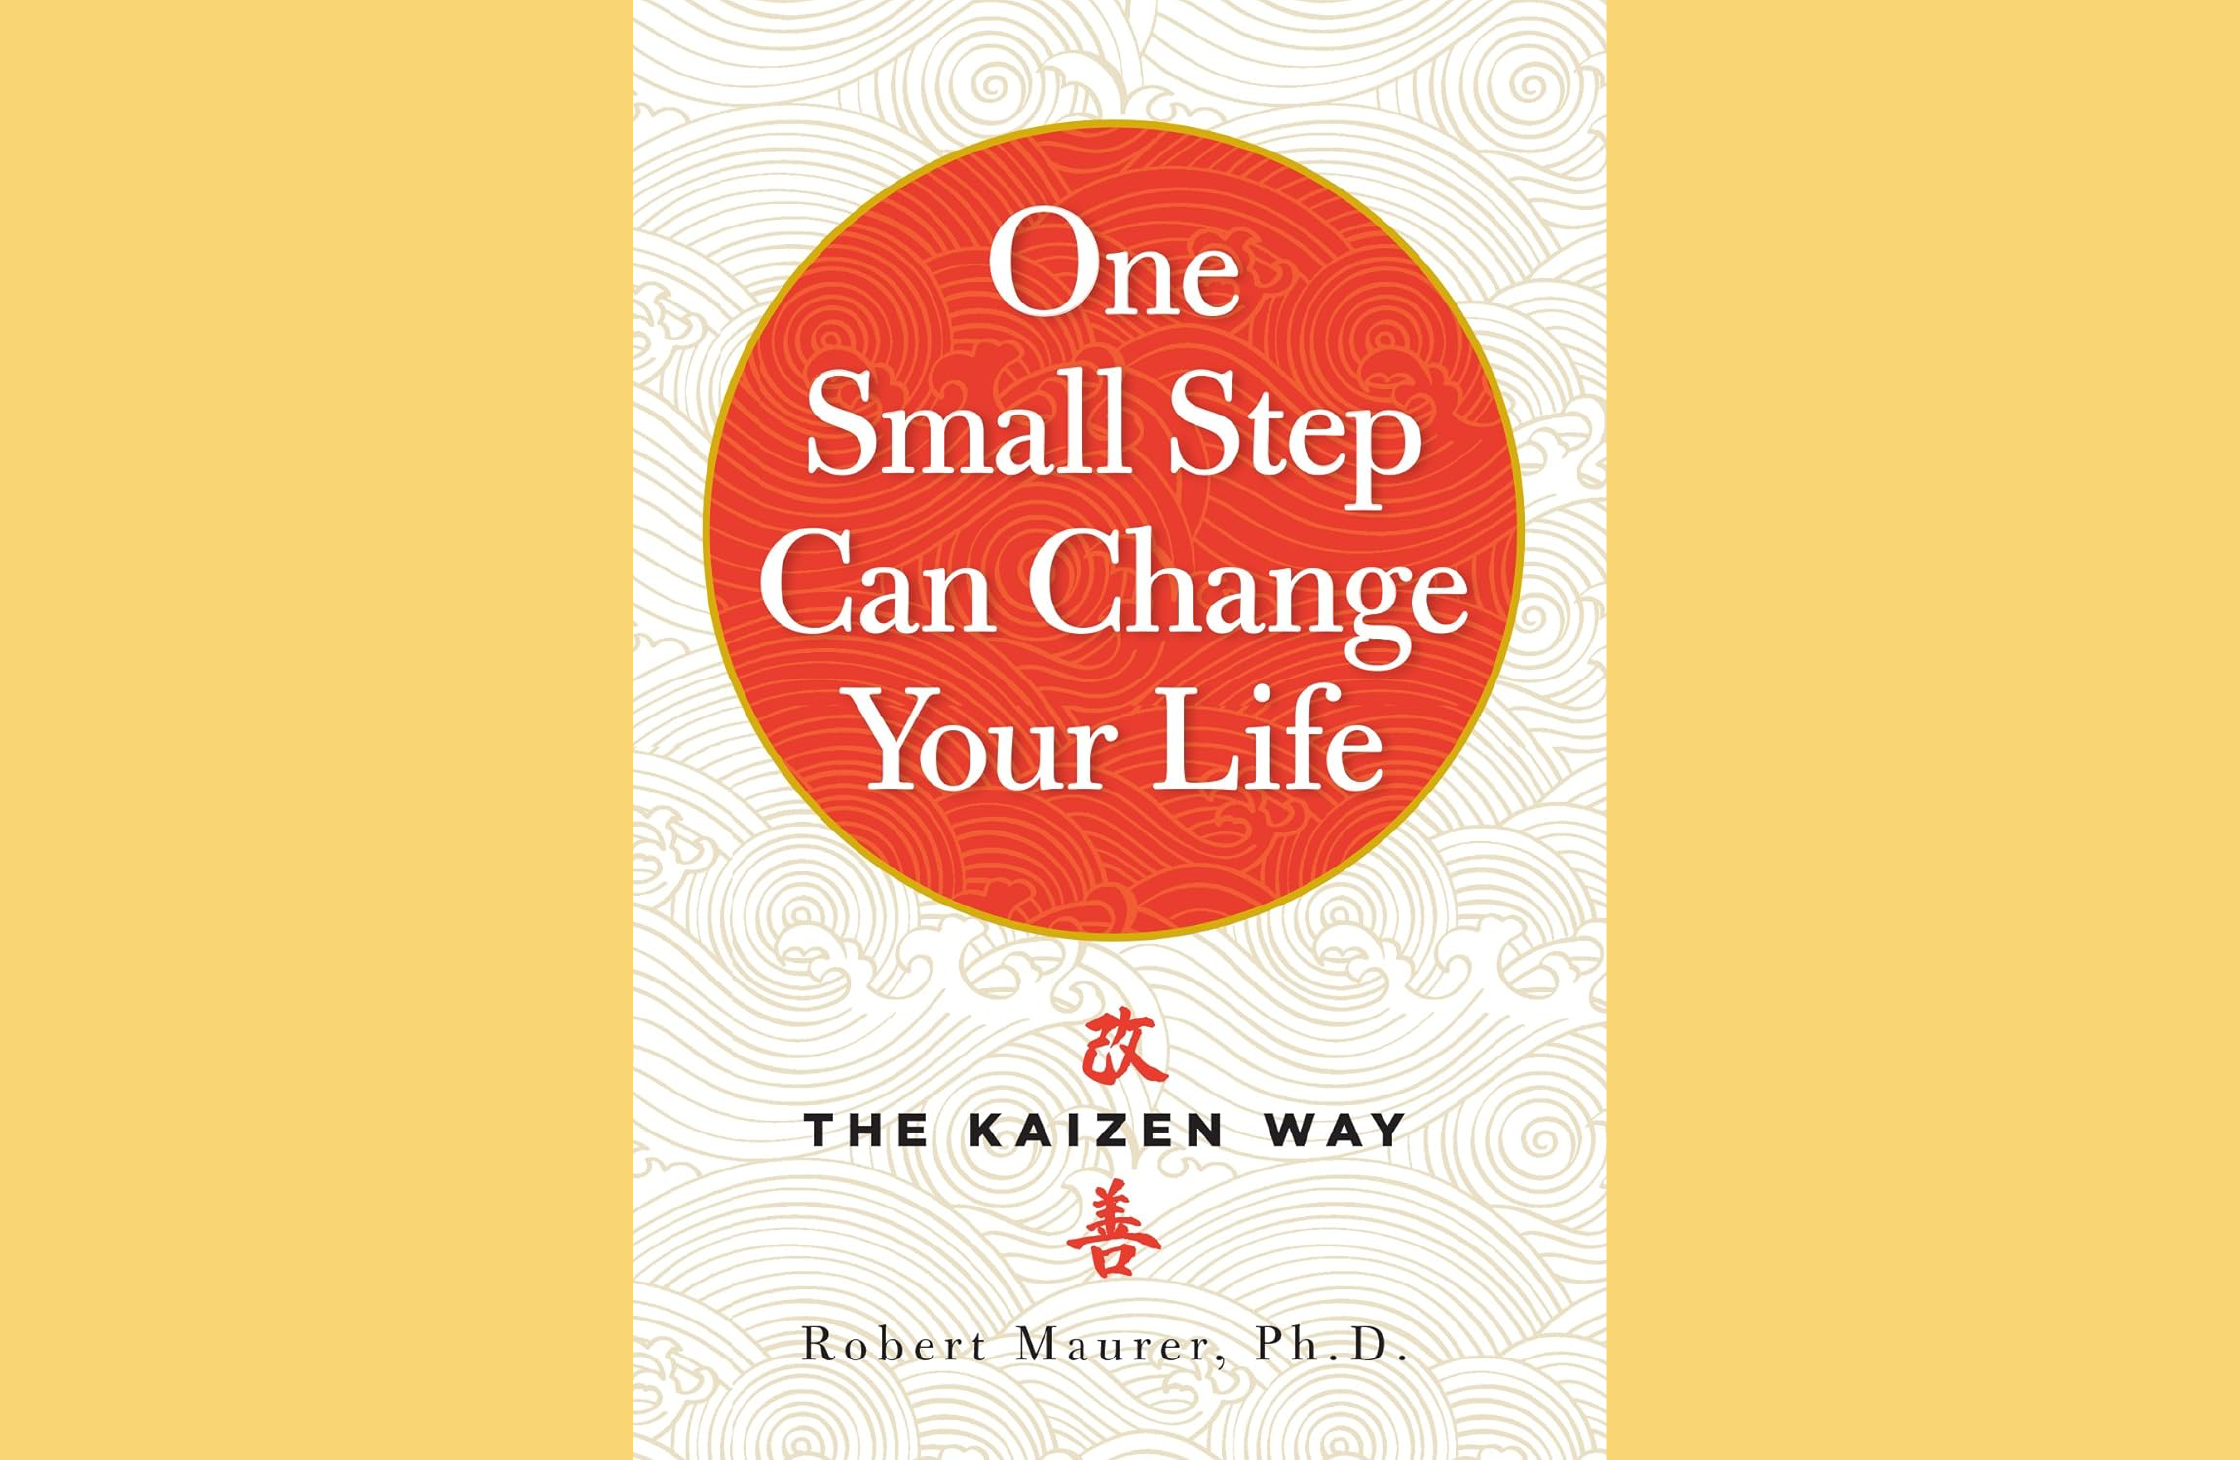 Summary: One Small Step Can Change Your Life by Robert Maurer